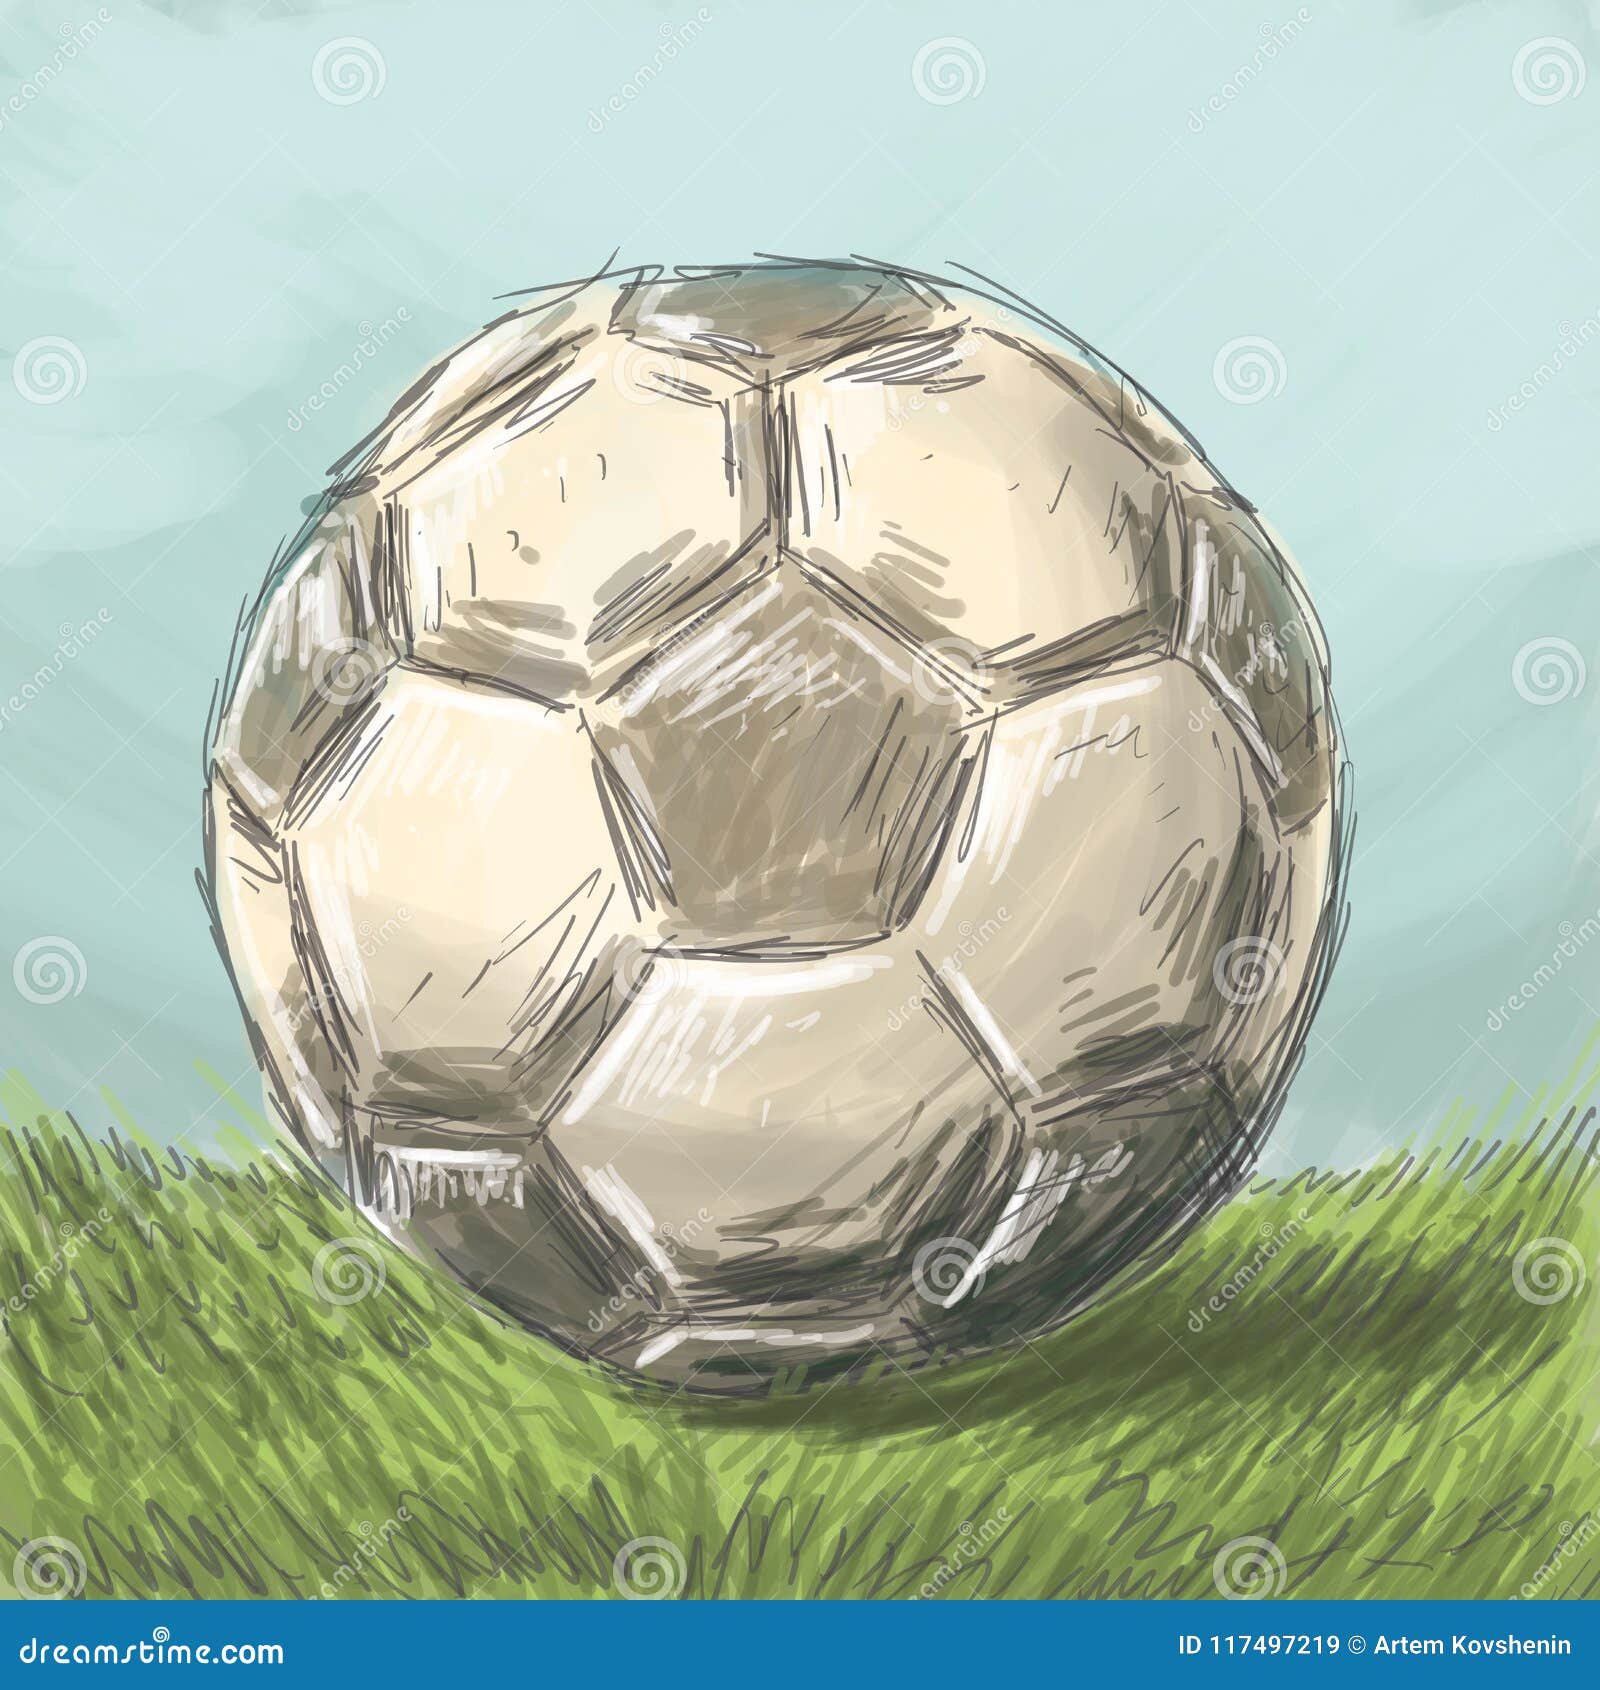 sketch ball football field under blue sky imitation drawing hand painted watercolor sketch ball 117497219